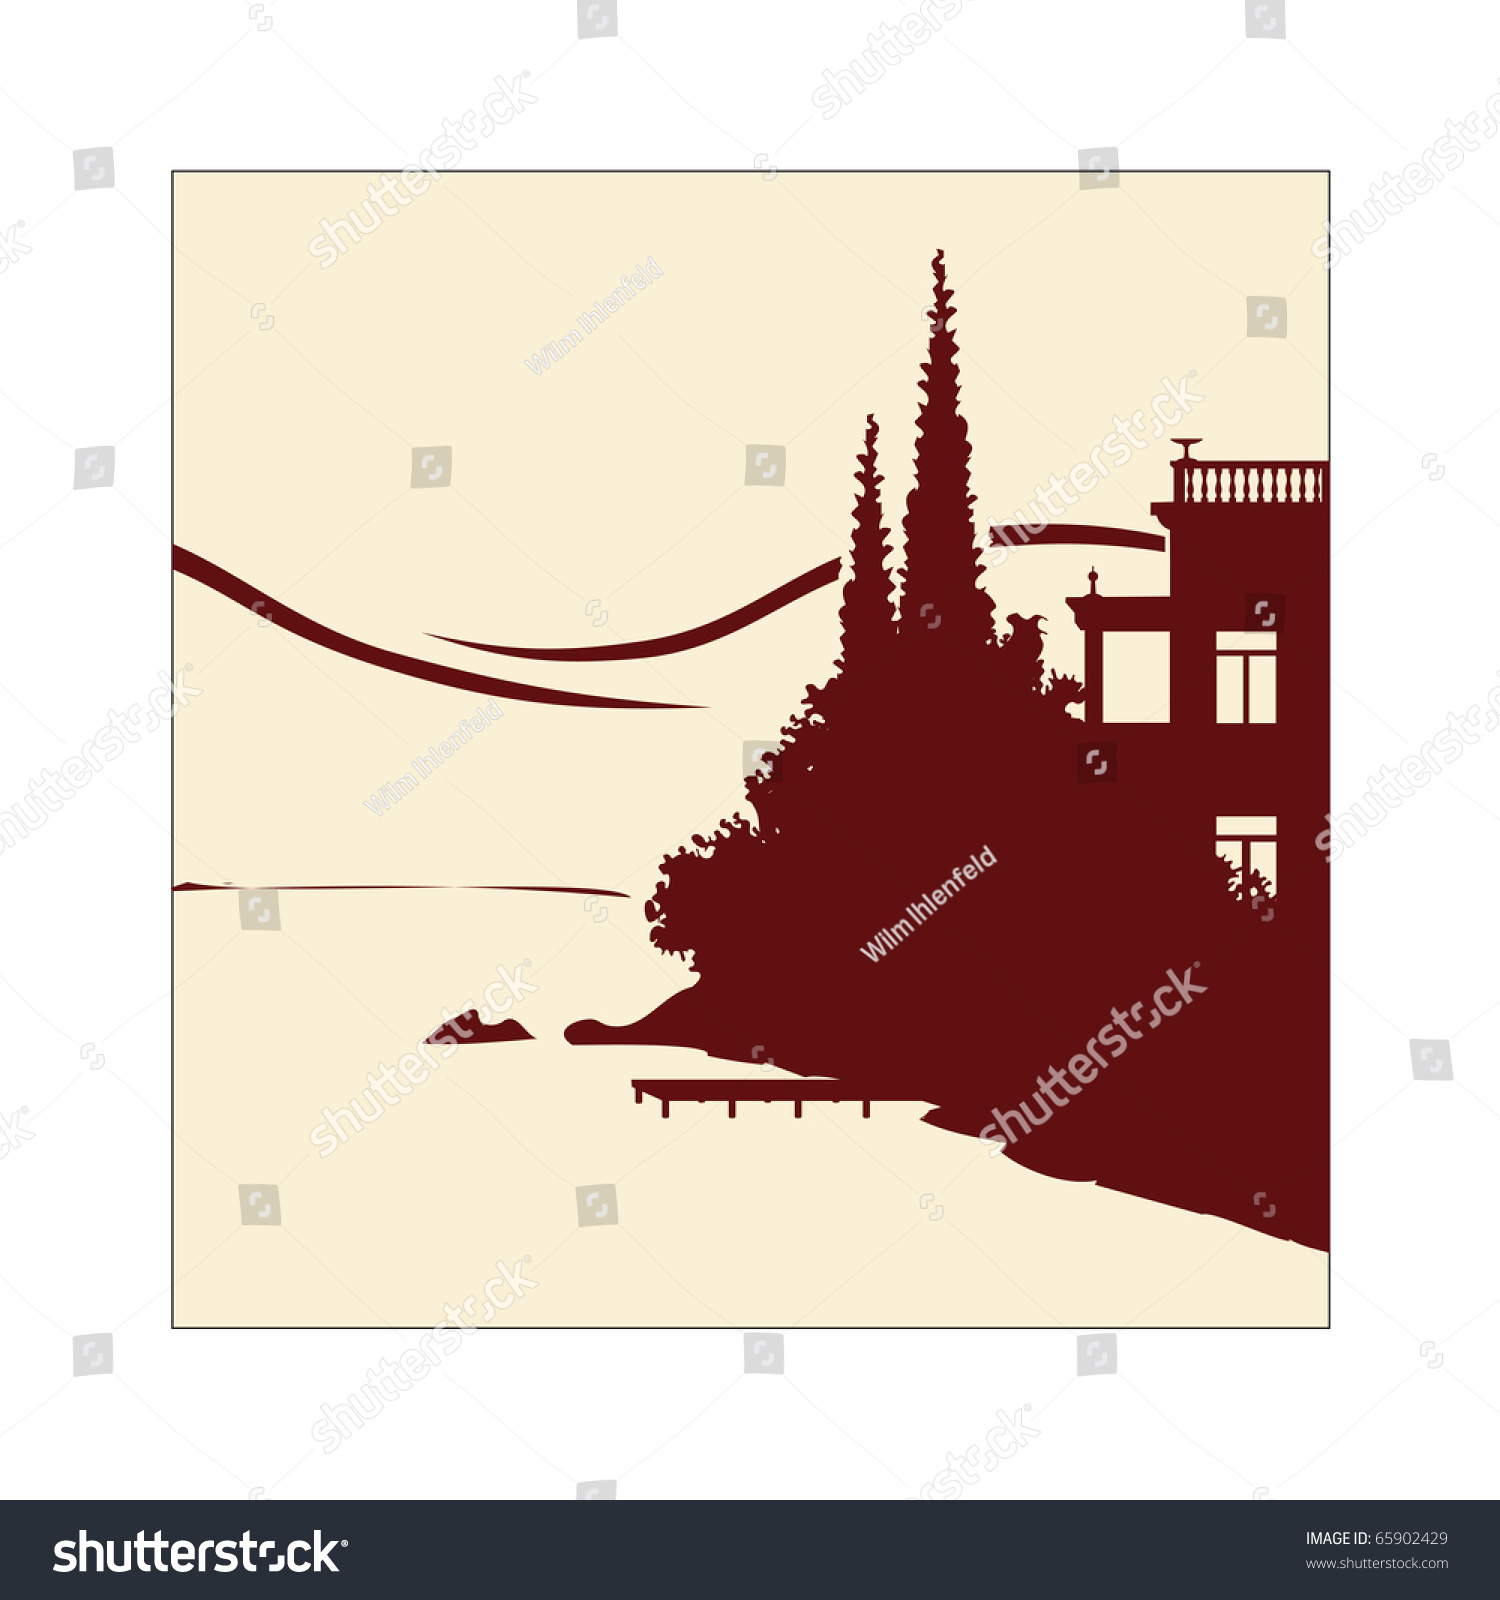 SVG of Handmade vector illustration of an old villa by a lake svg